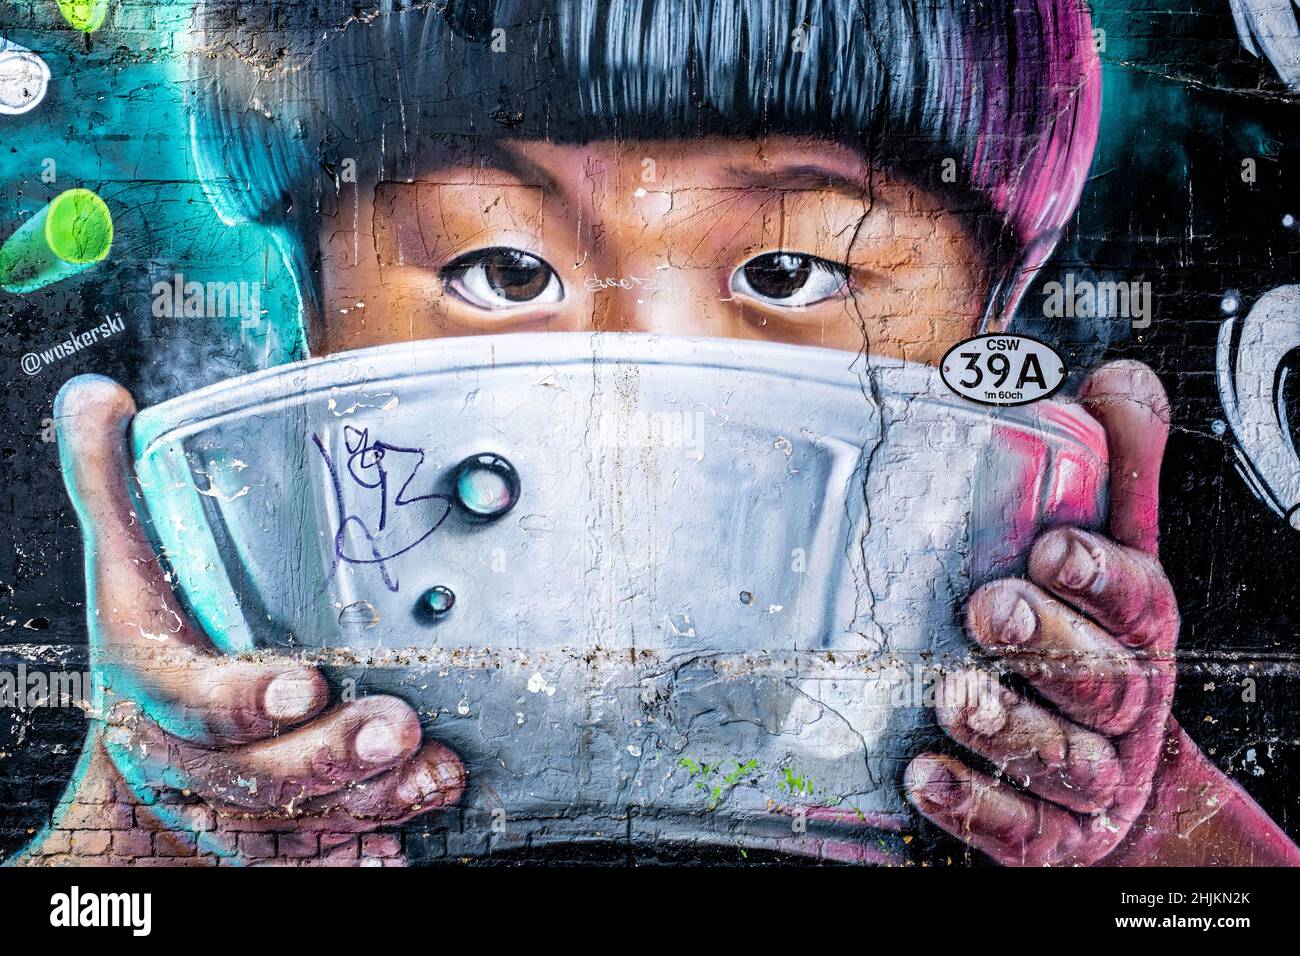 London England UK, 29 January 2022, Wall Art Or Graffiti Of Asian Child Drinking From A Soup Bowl Outside Wagamama Restaurant Bankside London Stock Photo